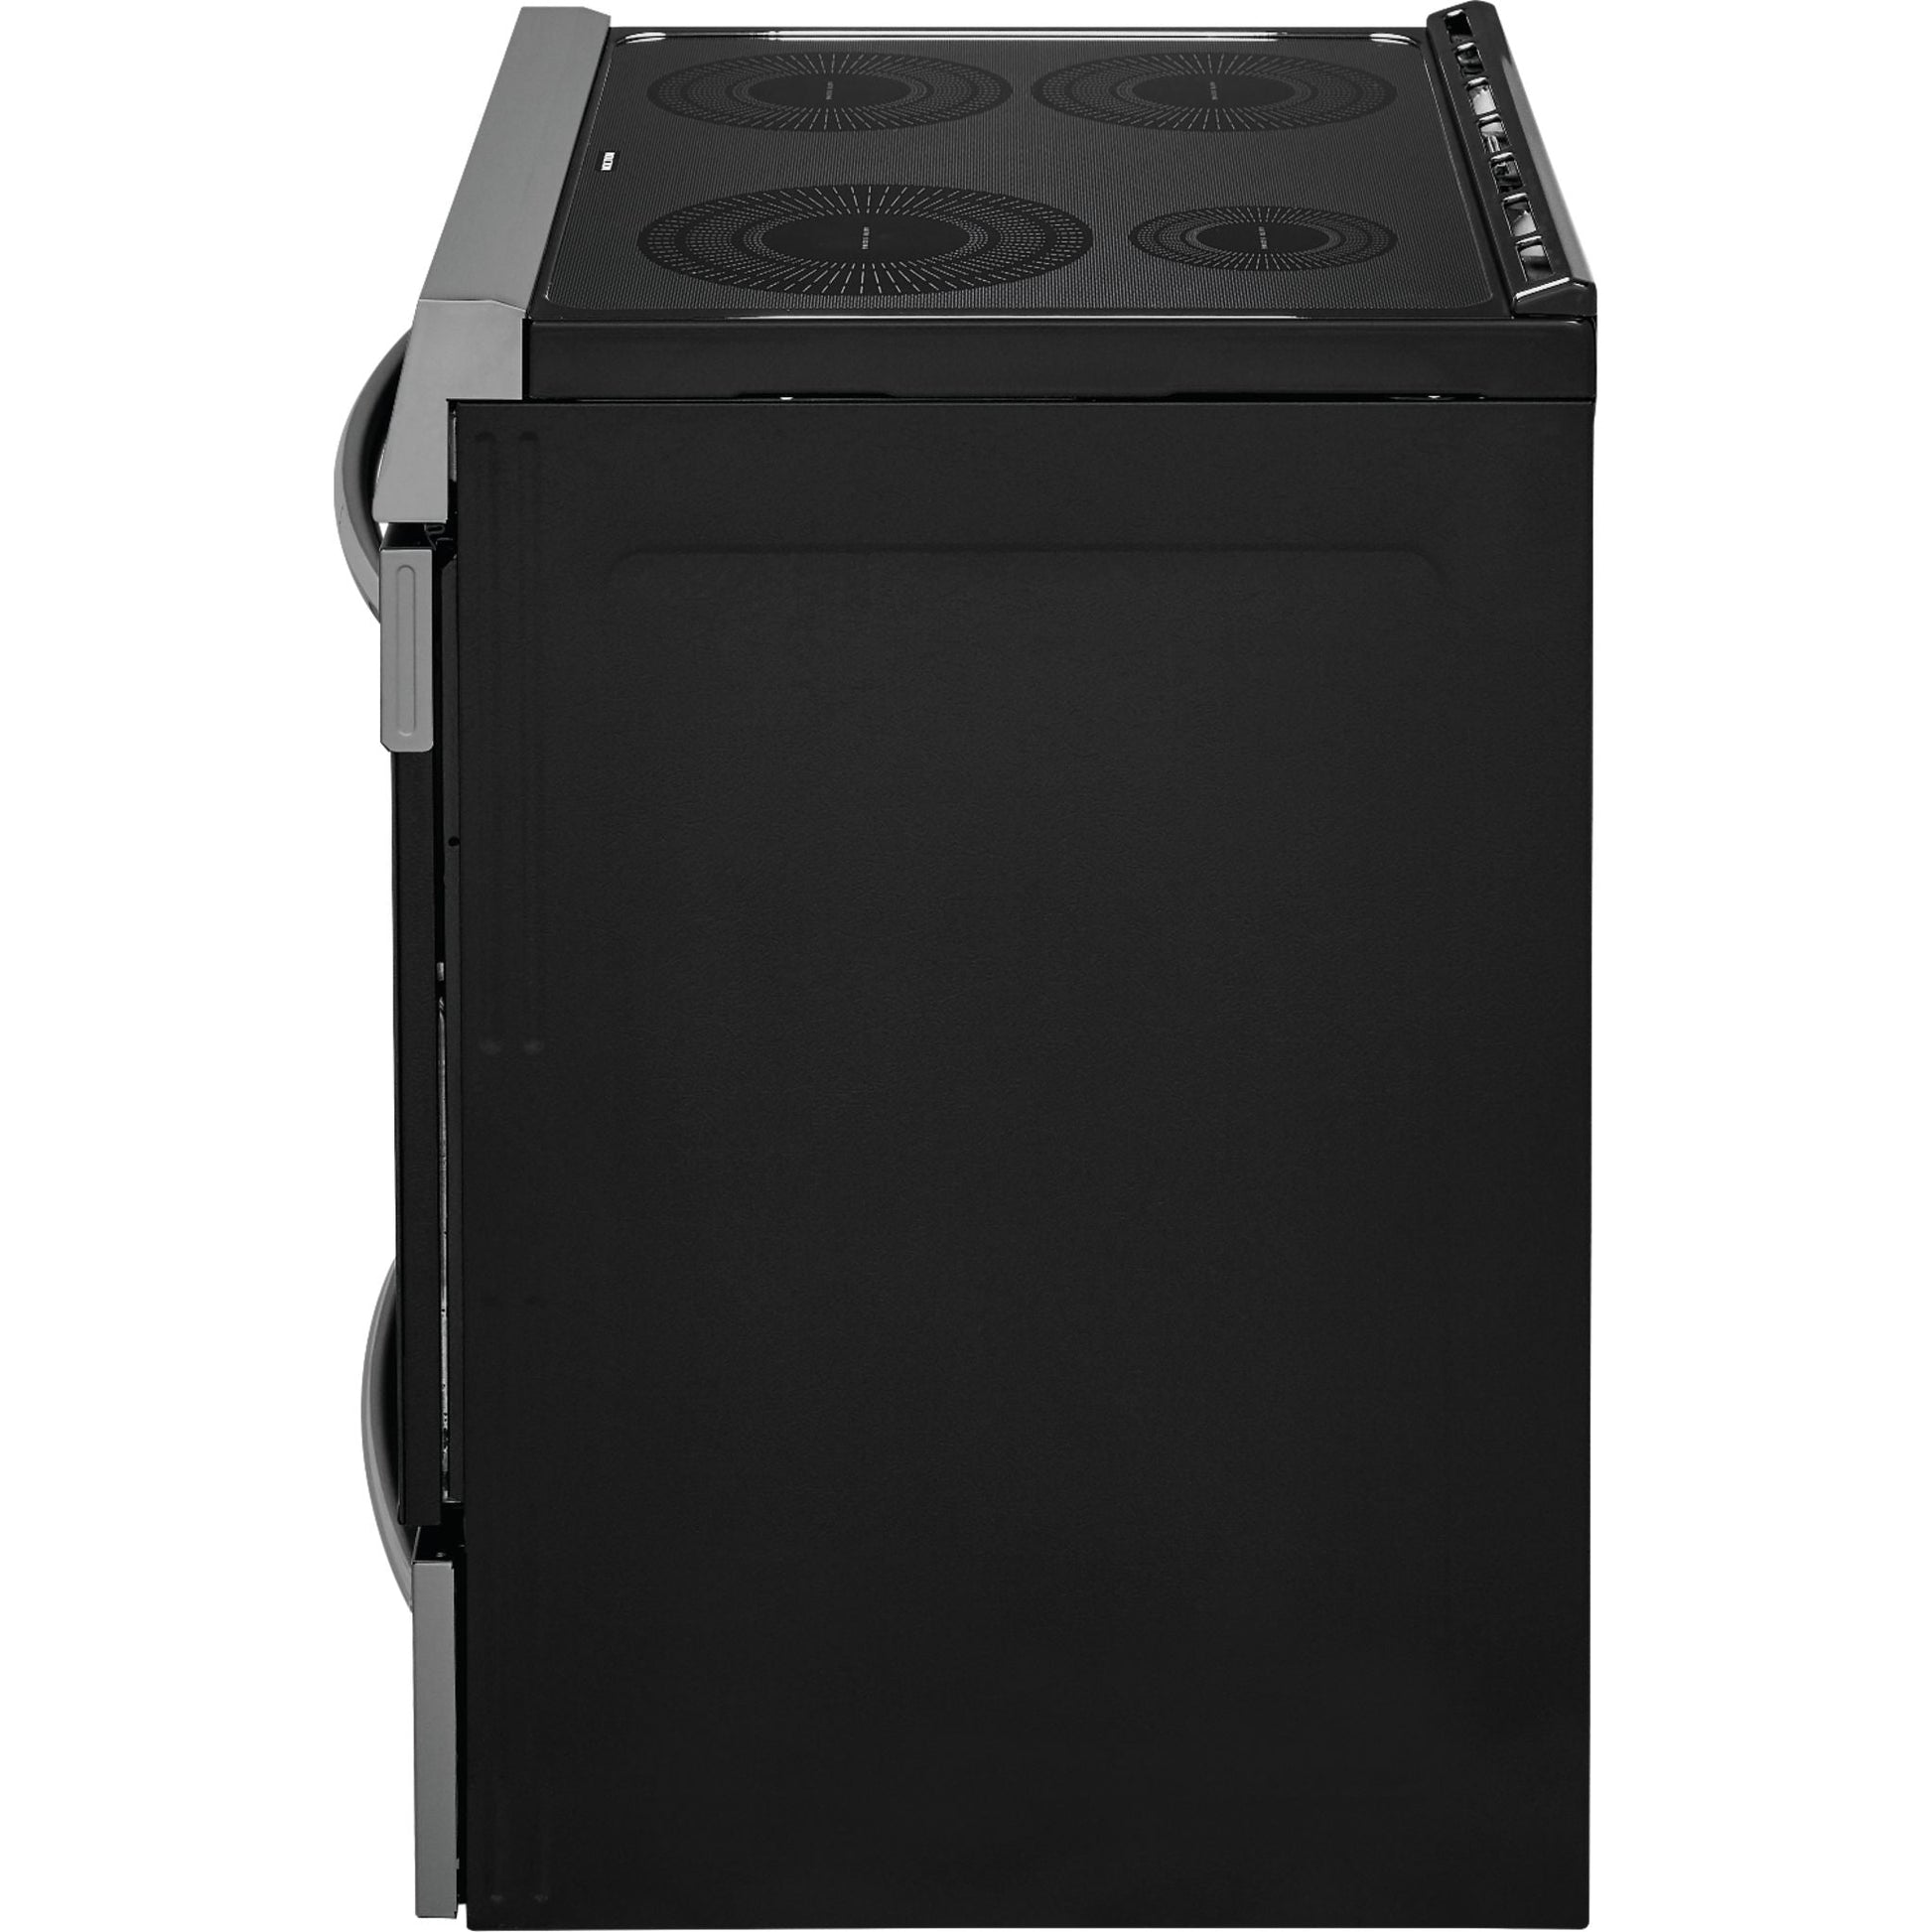 Frigidaire Gallery Front Control Range (CGIH3047VD) - Black Stainless